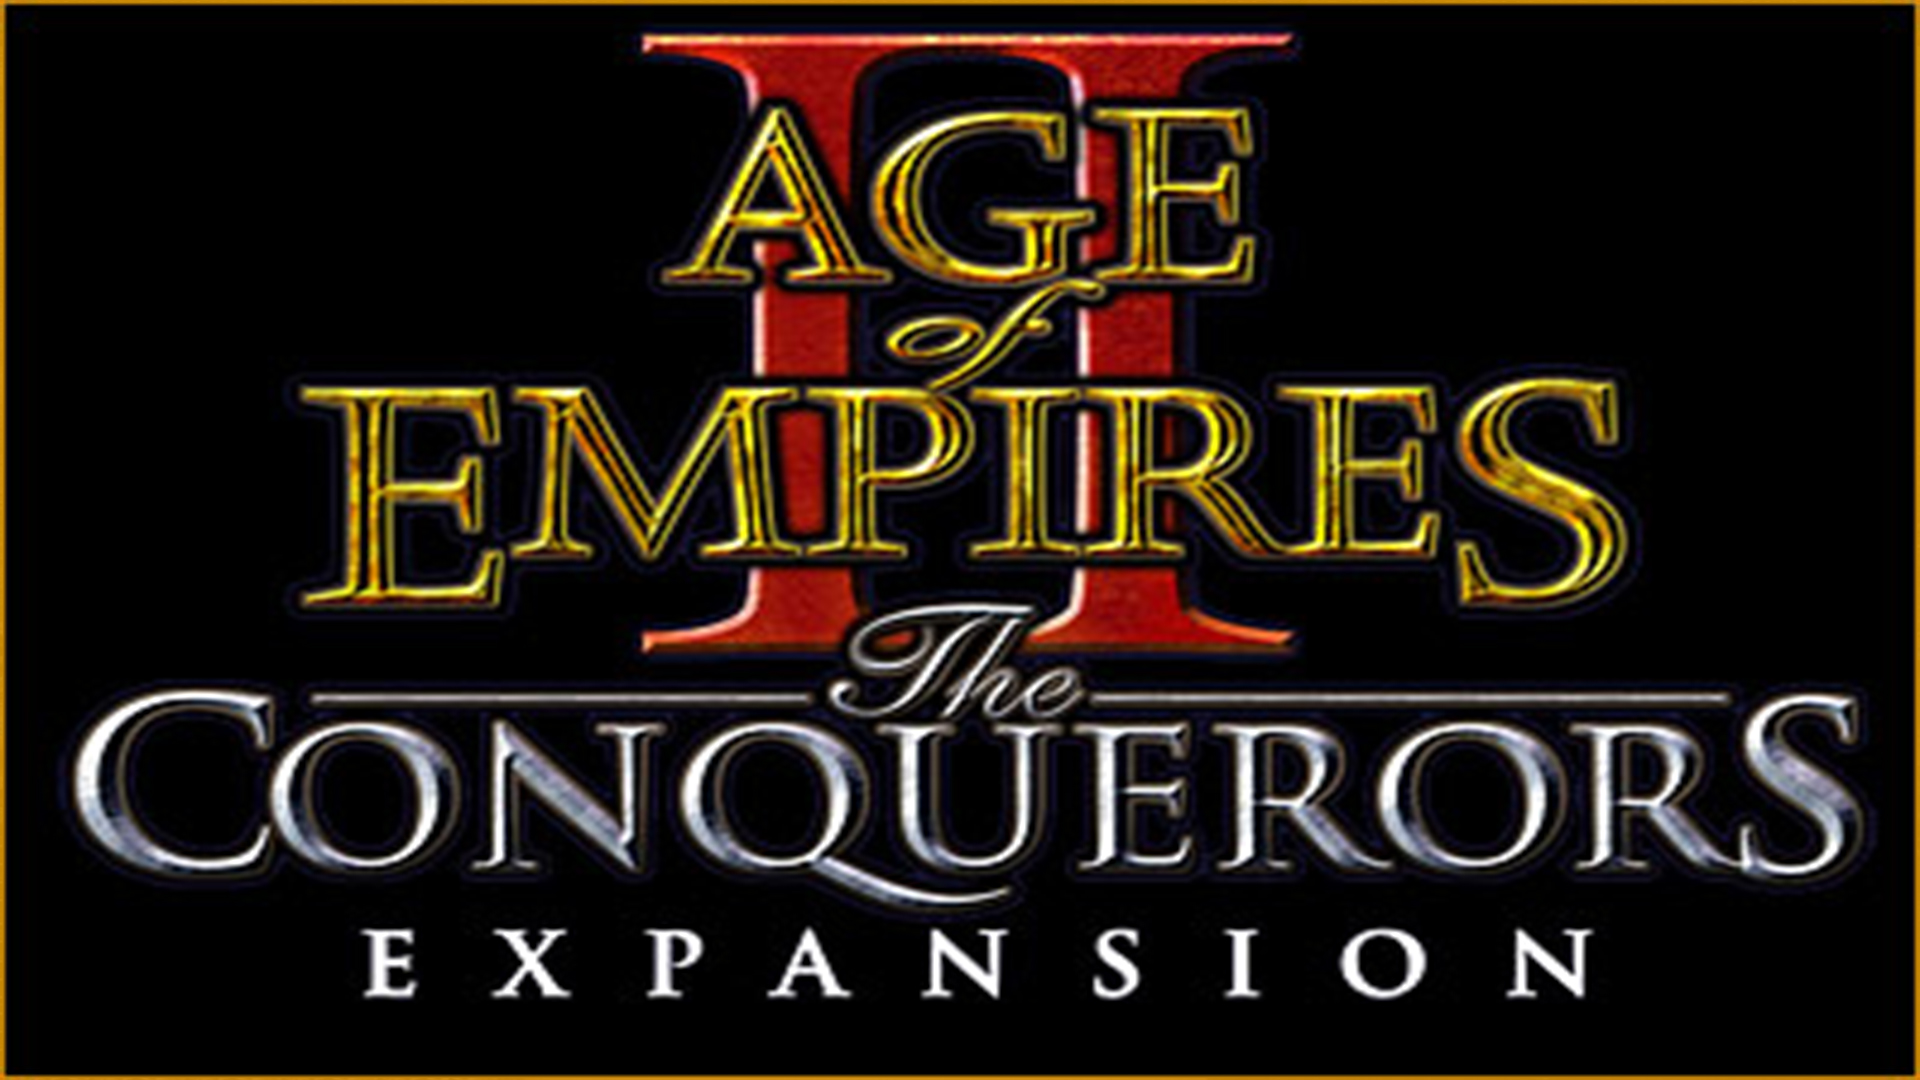 age-of-empires-ii-the-conquerors-expansion-details-launchbox-games